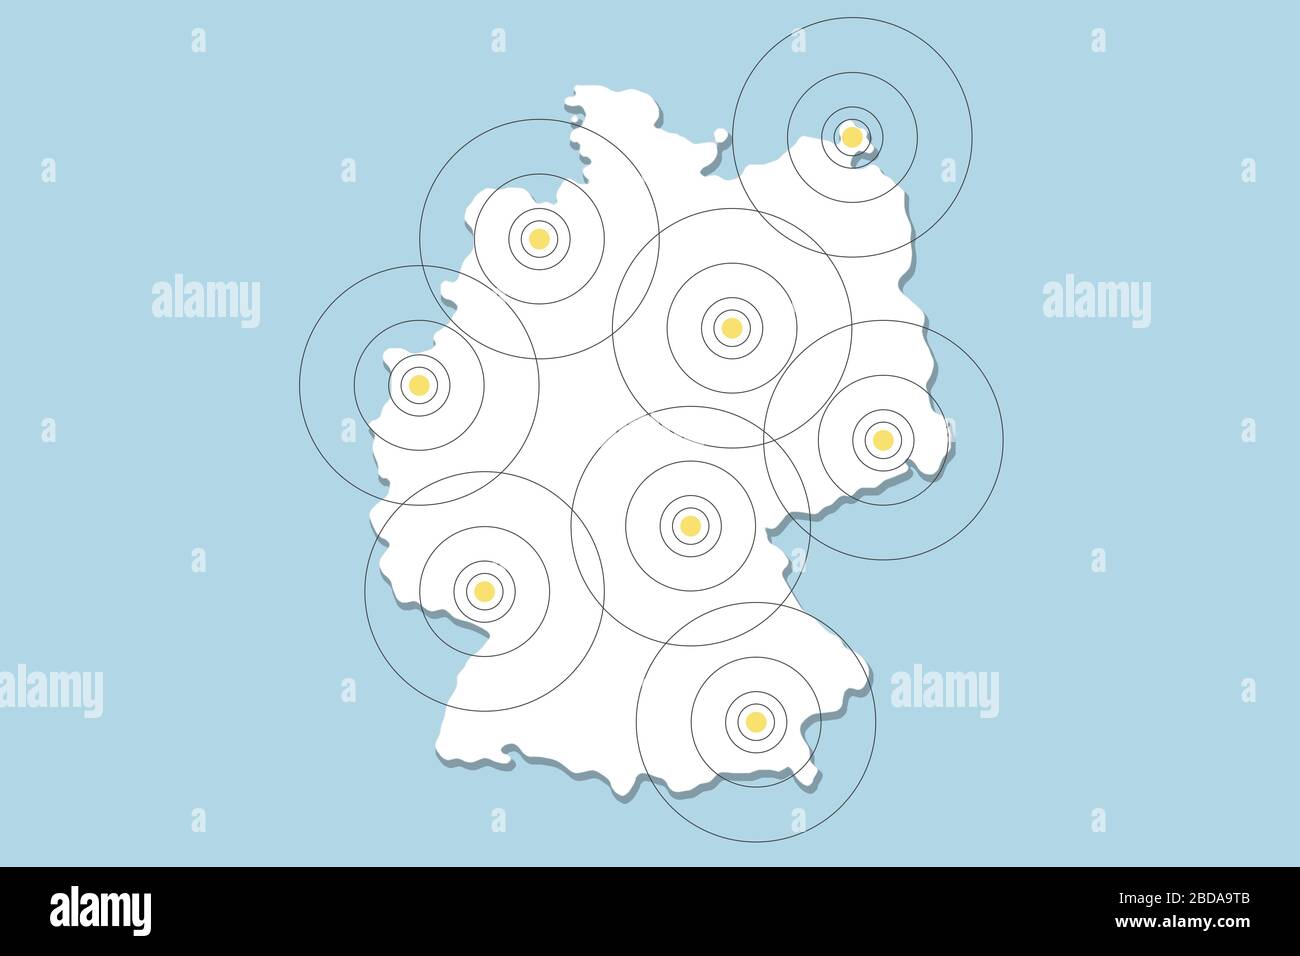 Mobile Phone Tracking political theme in Germany. Illustration with map of Germany and mobile phones. Stock Photo